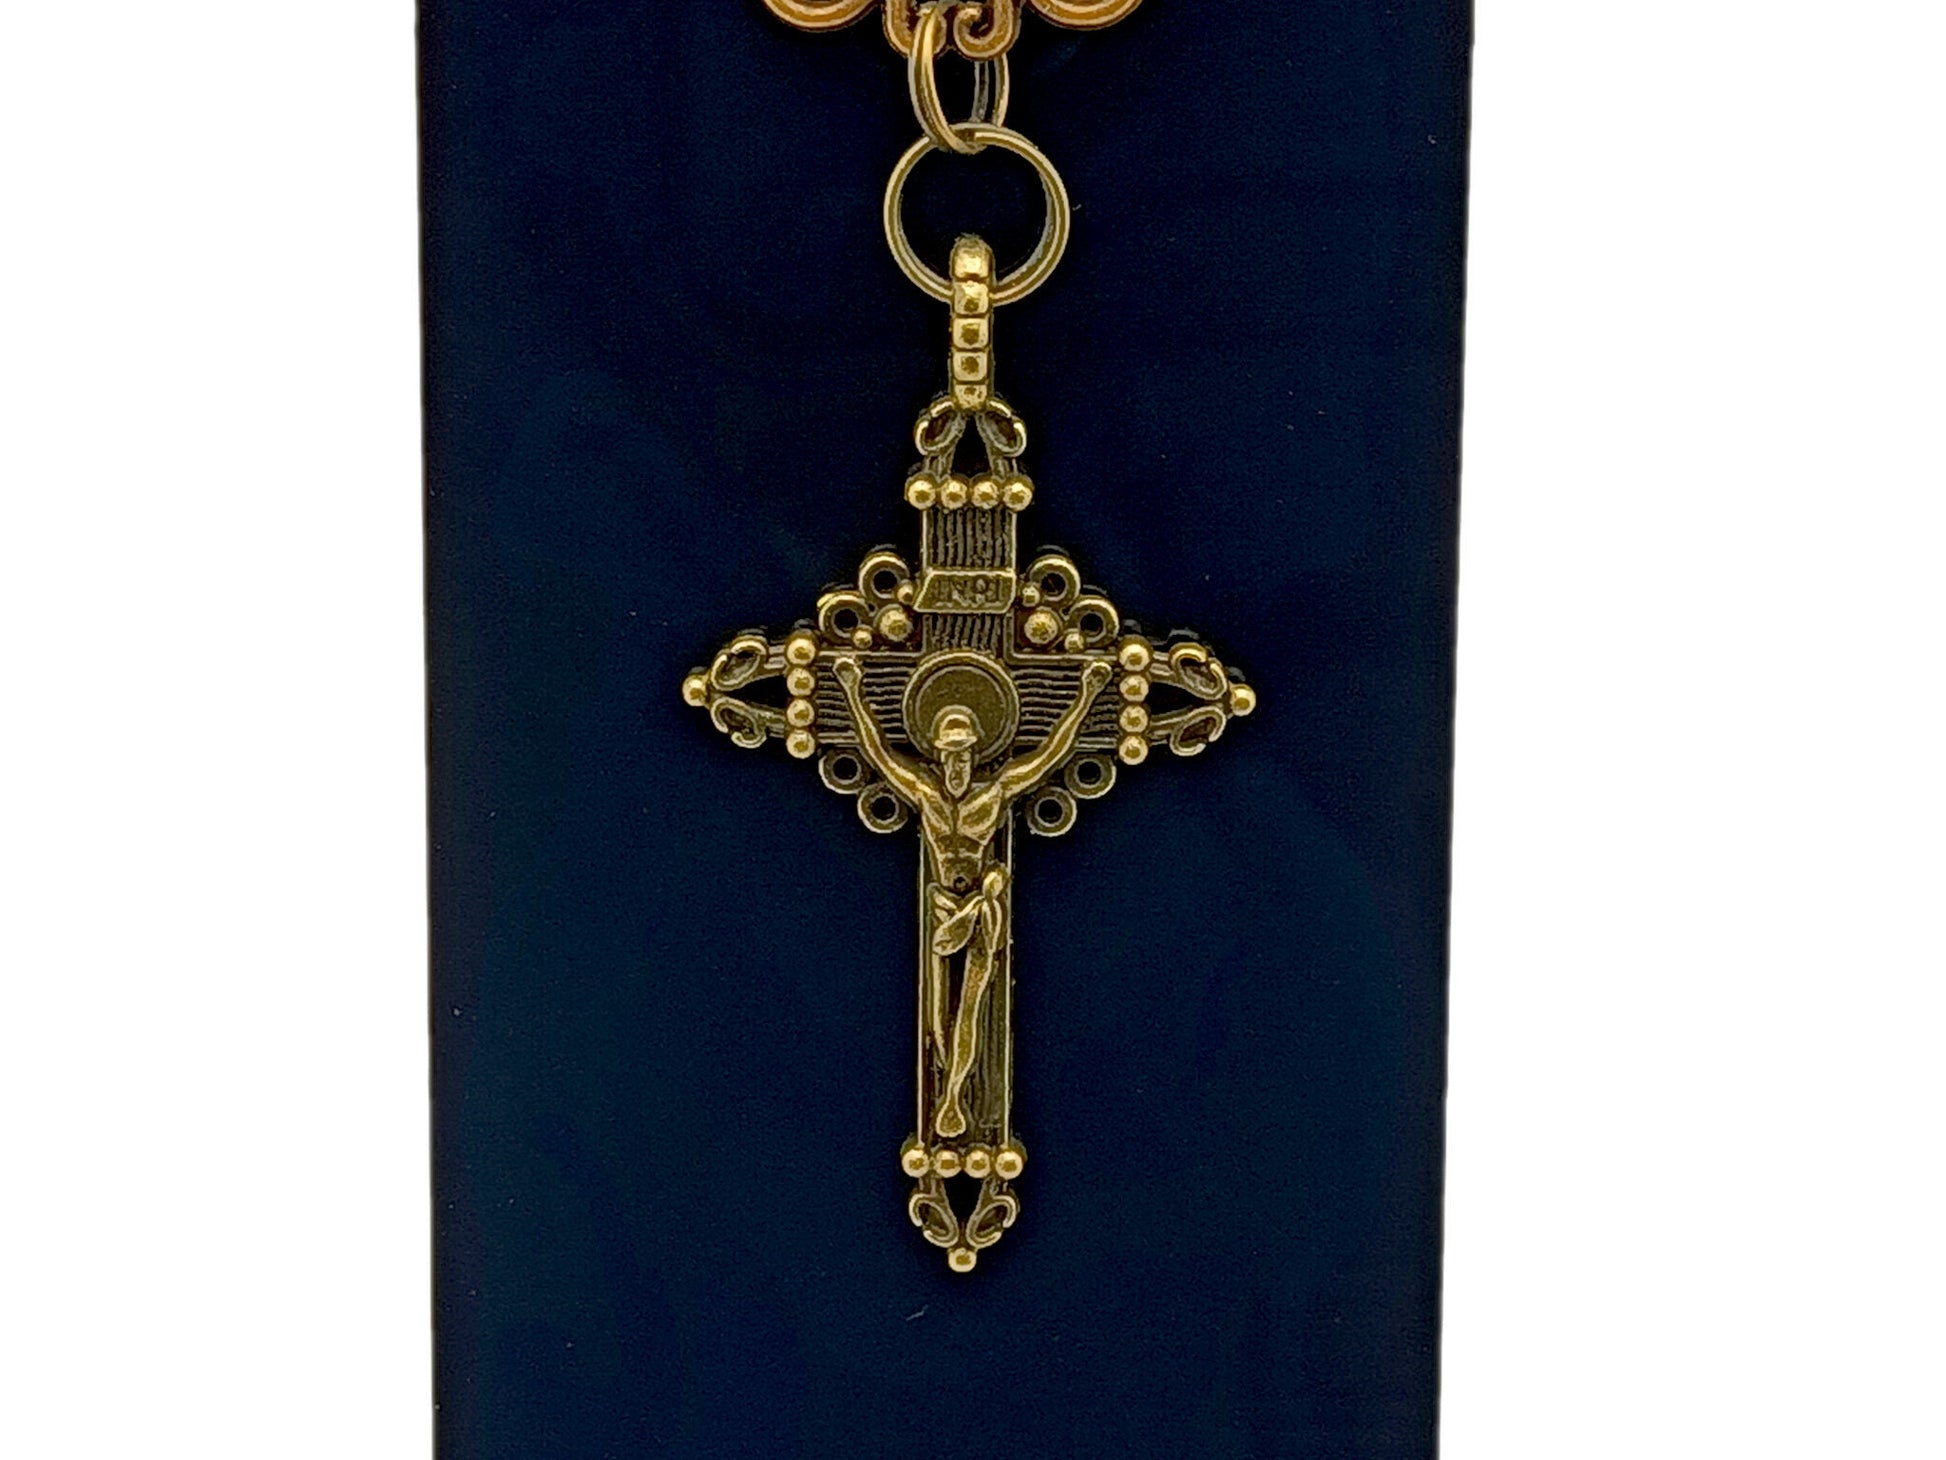 Two Hearts of Jesus and Mary unique rosary beads purse clip keychain with brass filigree crucifix and Saint Benedict linking medals